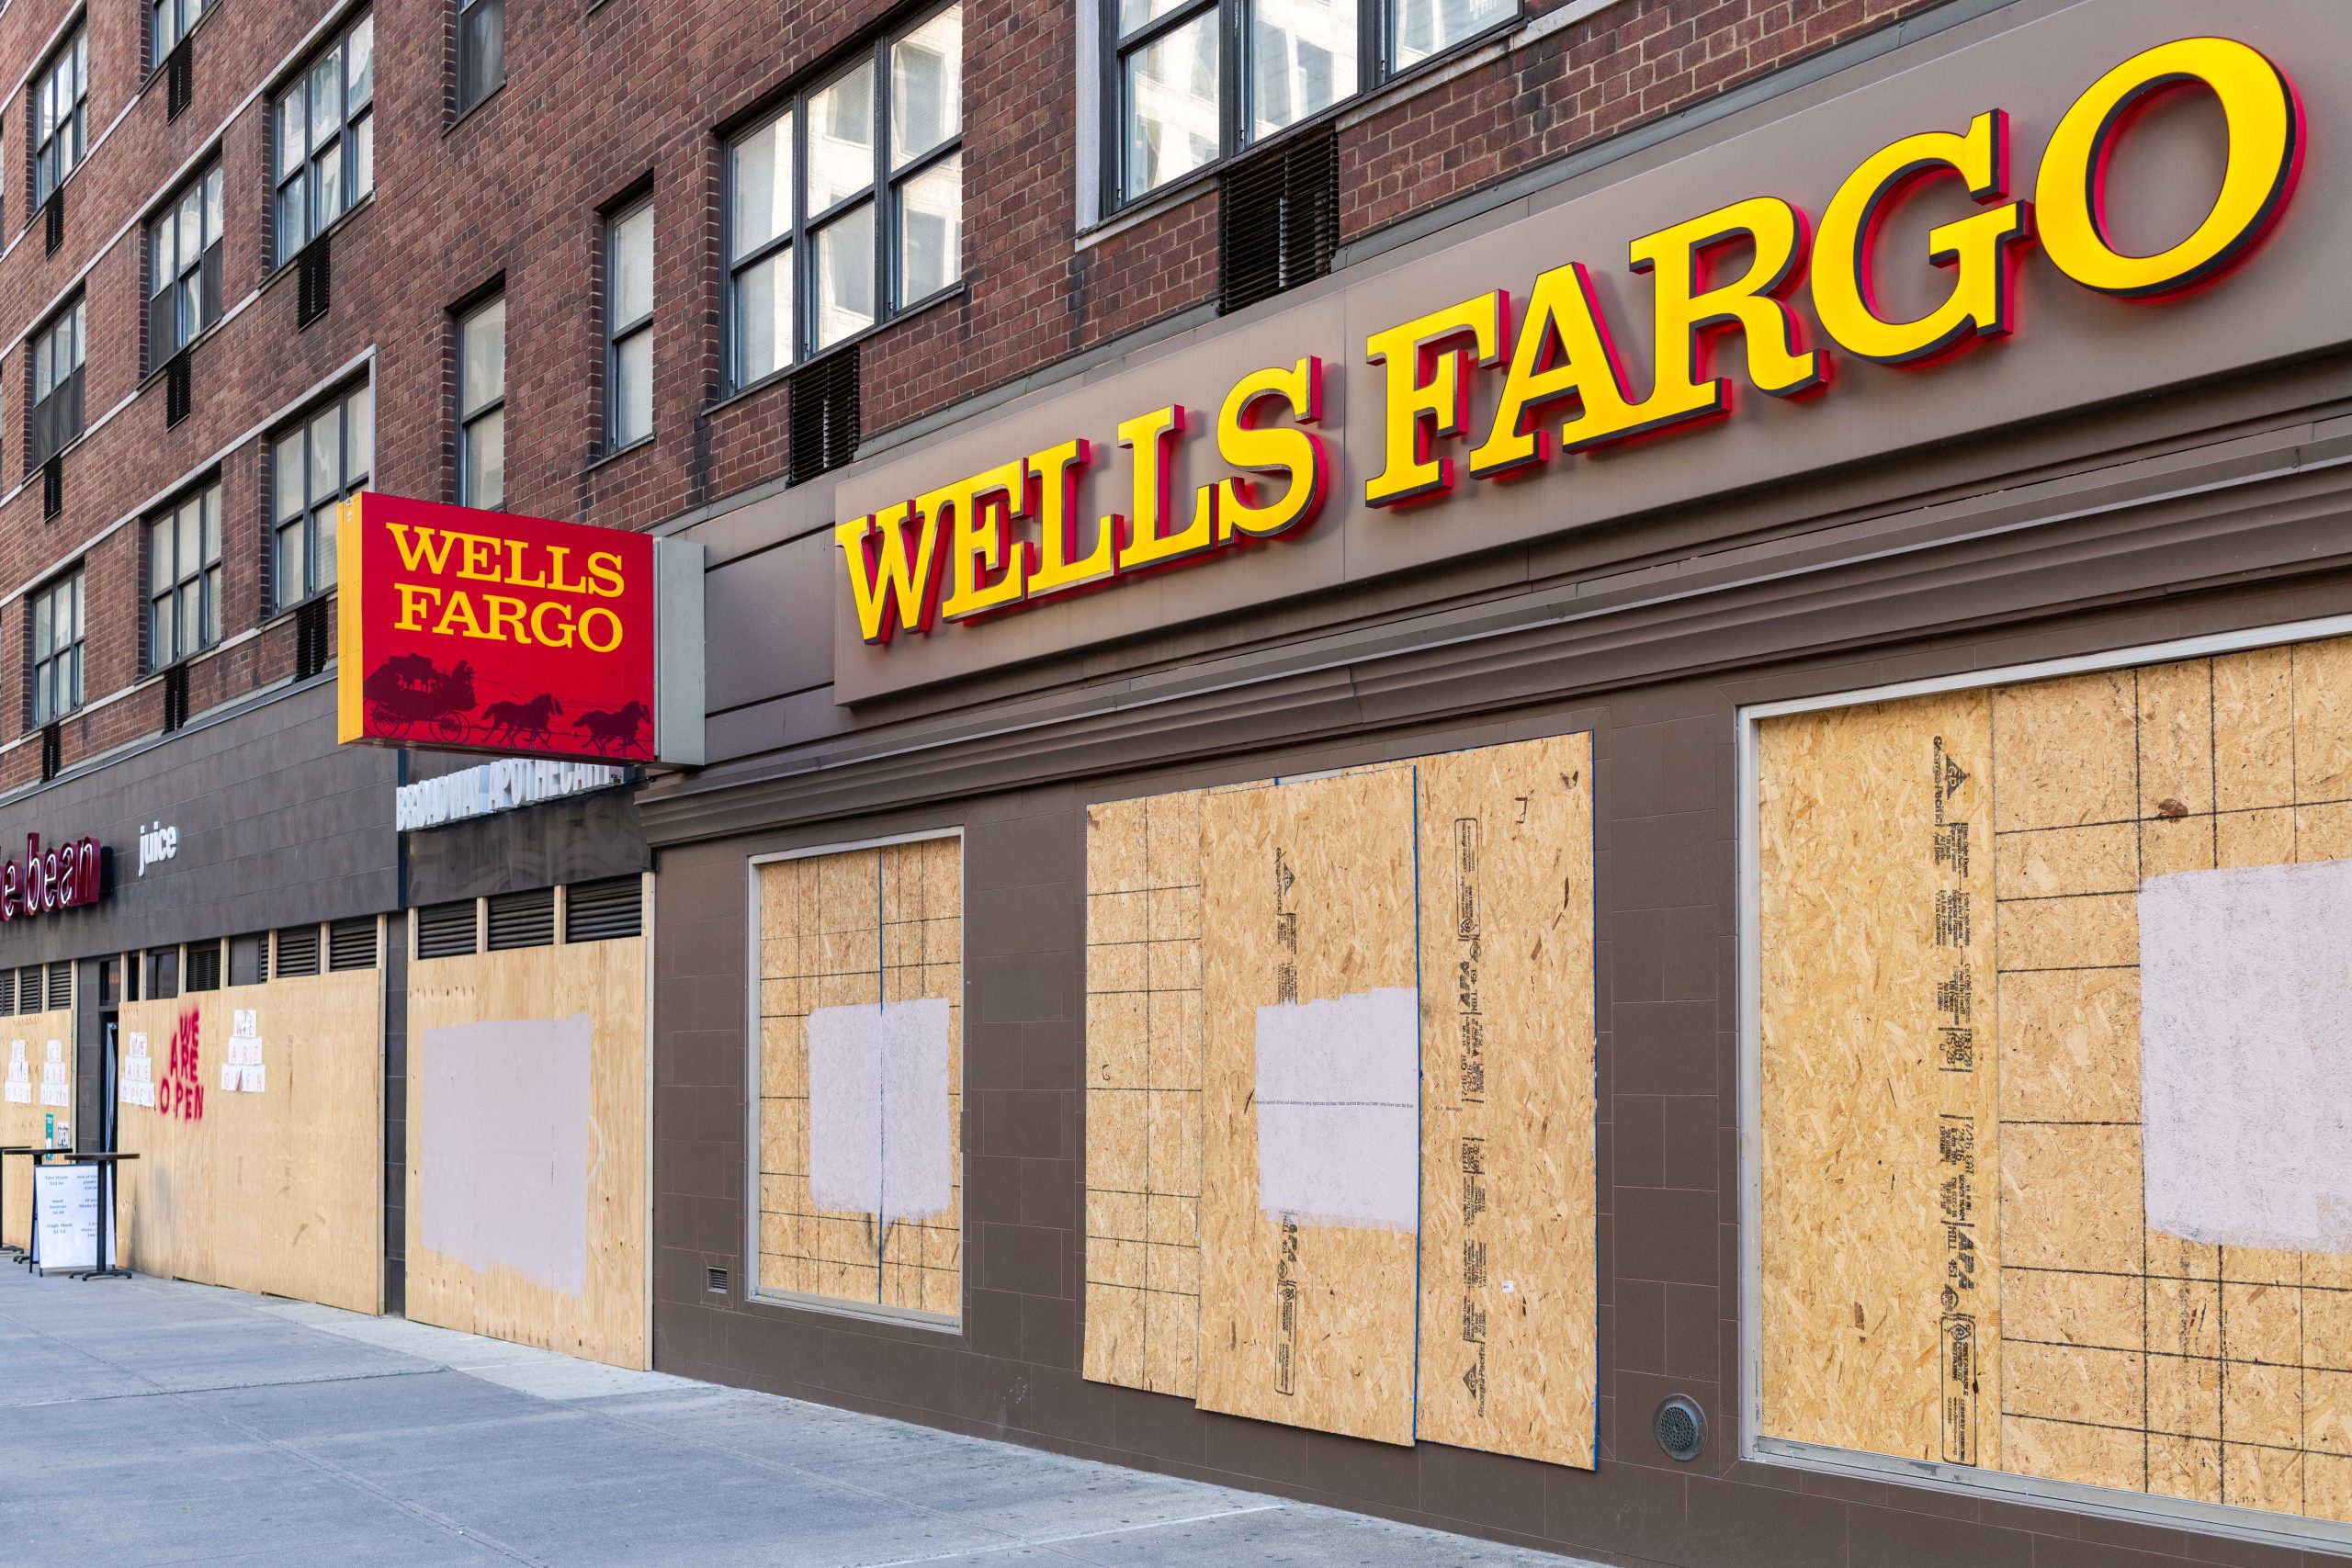 Sec-takes-action-wells-fargo-advisors-penalized-35m-for-excessive-fees